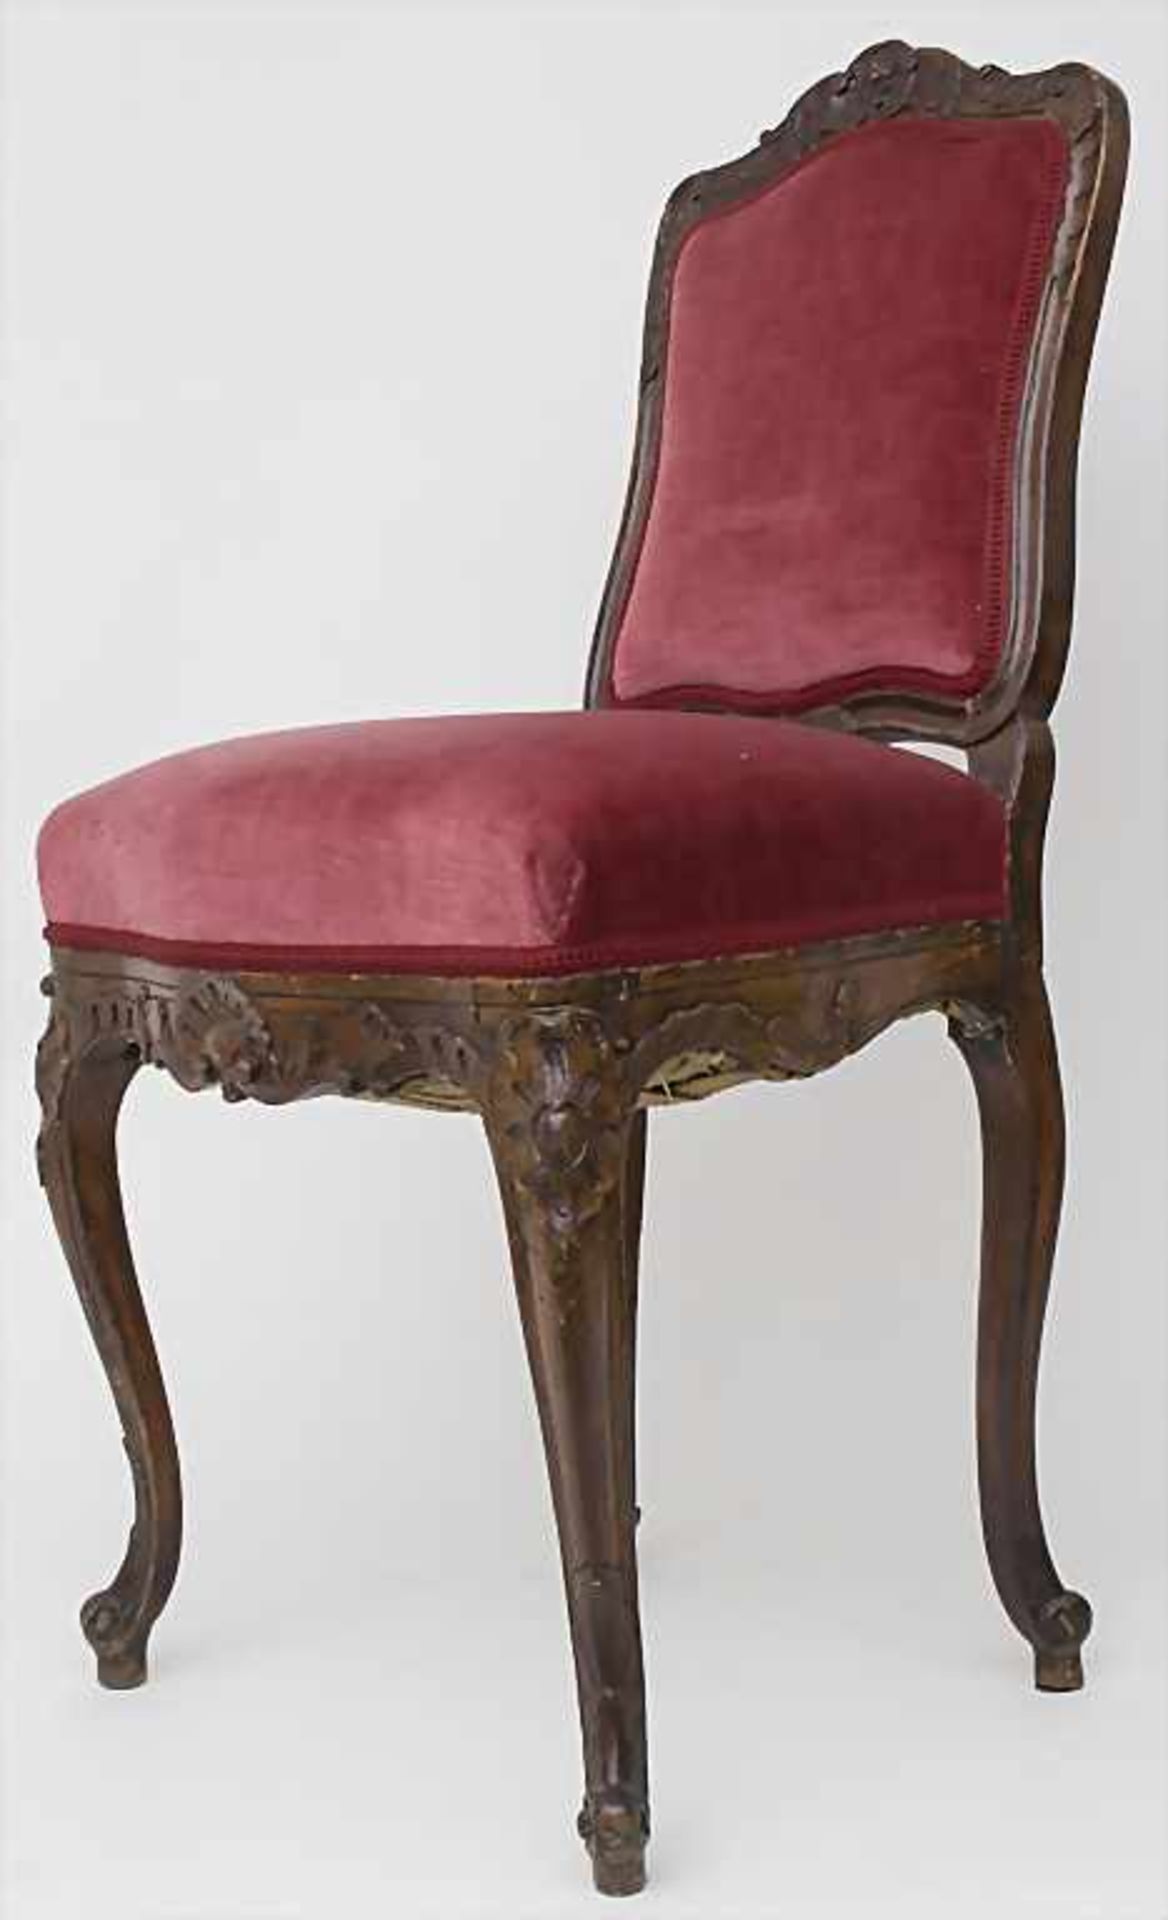 Rokoko--Stuhl mit Rocaillendekor / A Rococo chair with rocailles - Image 2 of 5